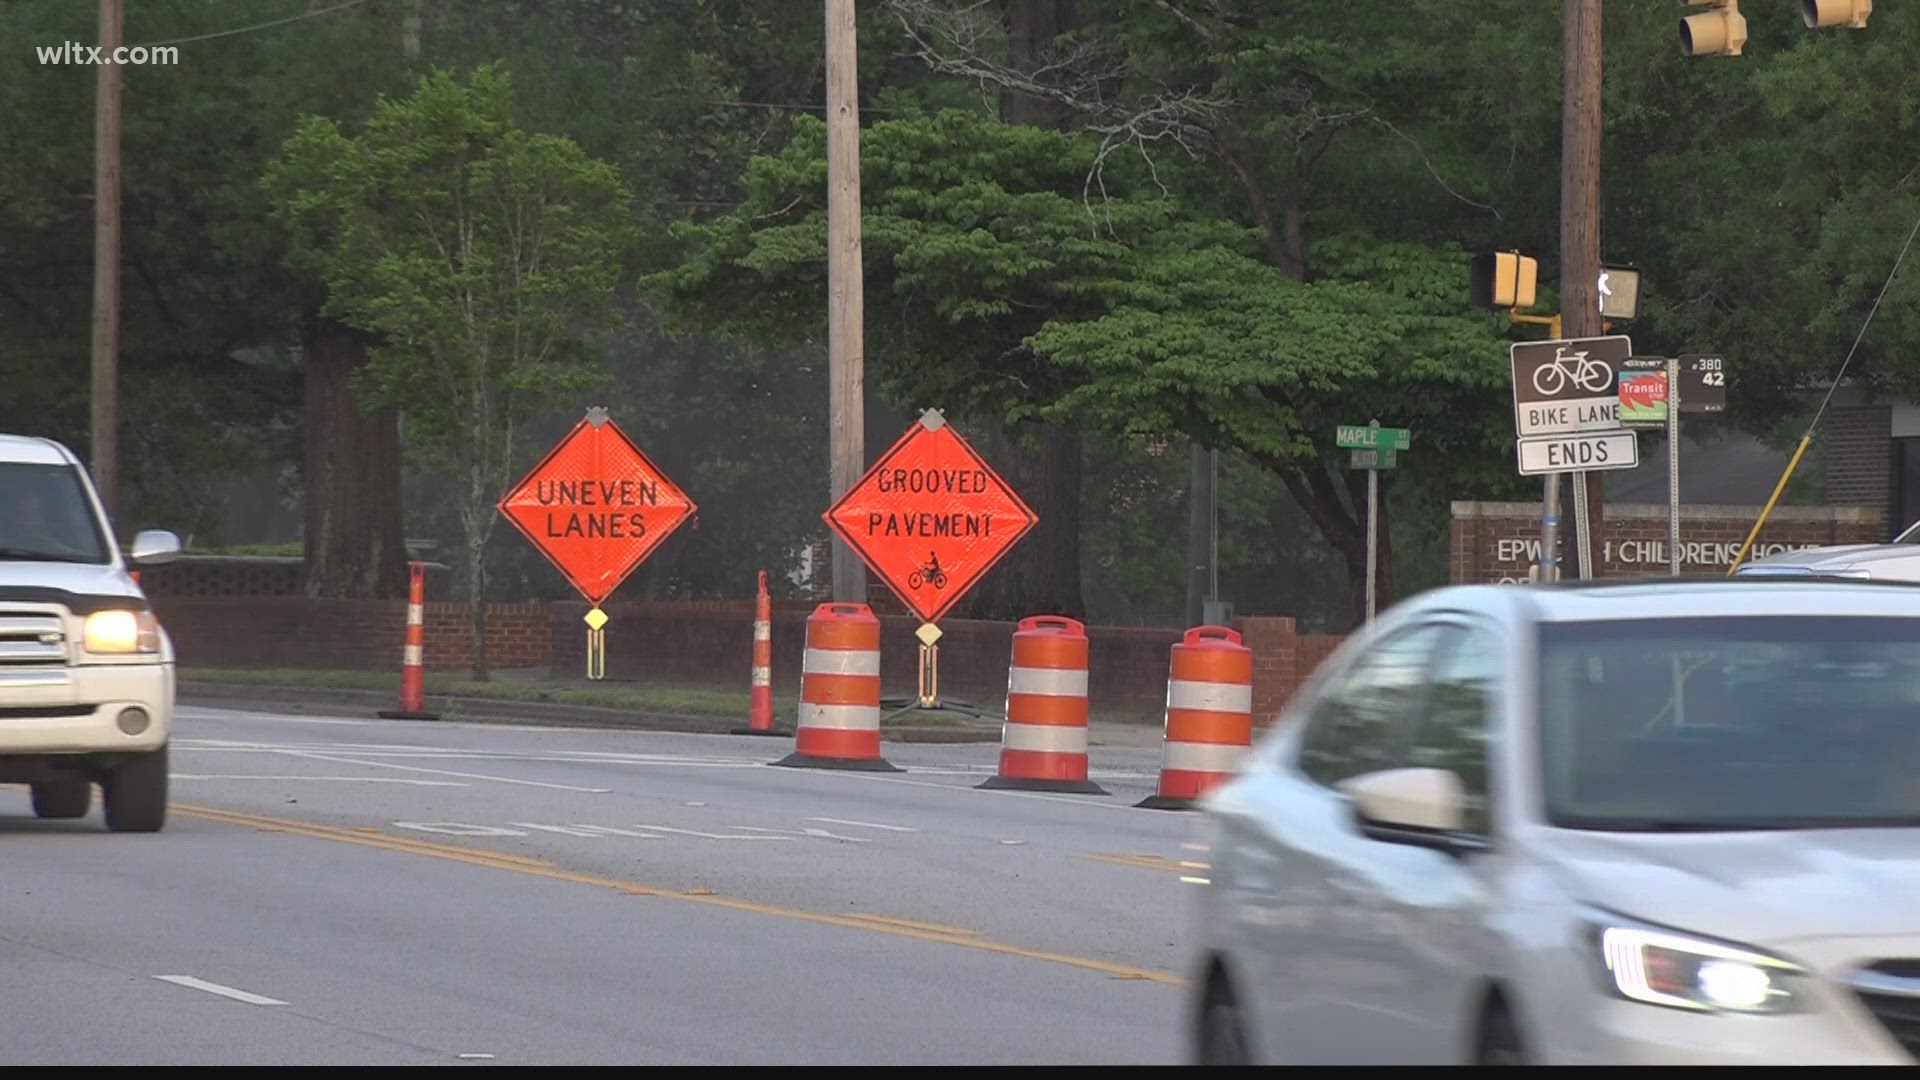 The project will bring new road surfaces, restriping, and a crosswalk near Dreher High School.